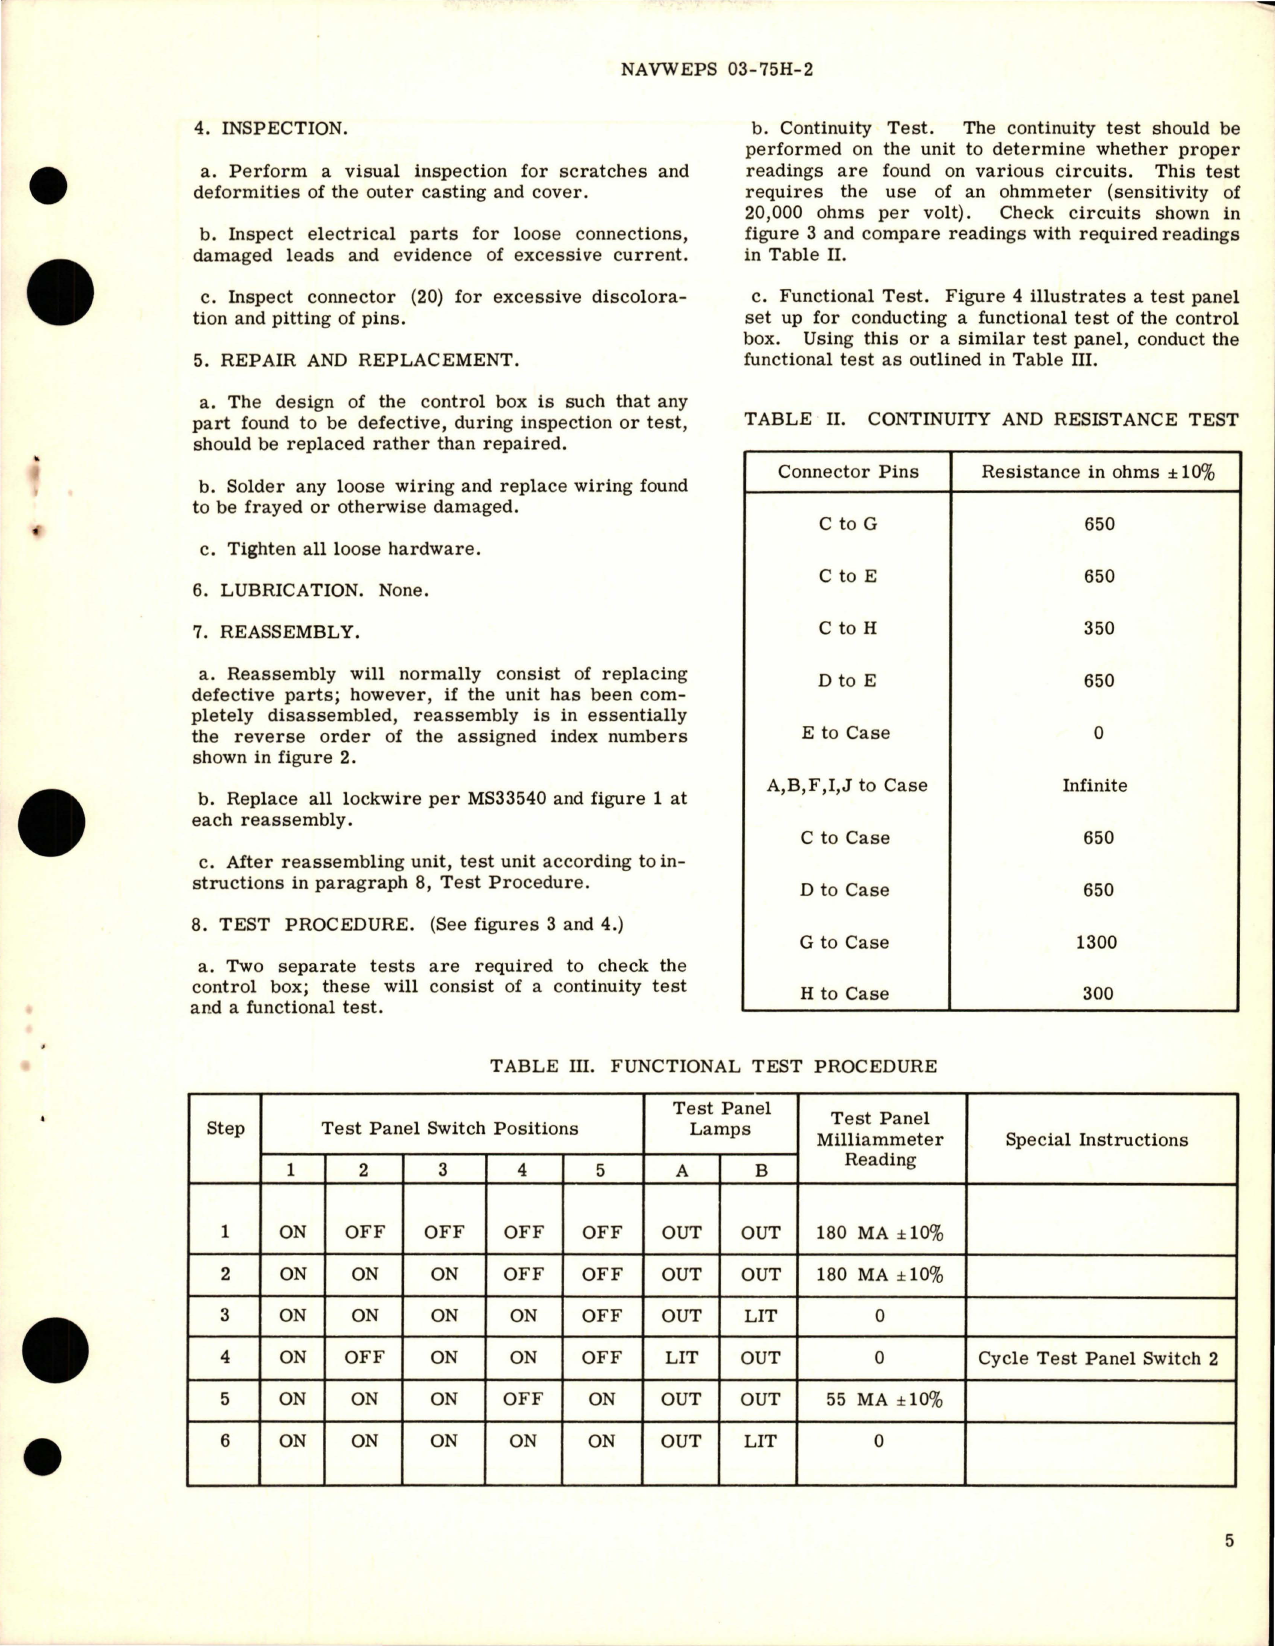 Sample page 5 from AirCorps Library document: Overhaul Instructions with Illustrated Parts Breakdown for Temperature Relay Control Box - Part 25730048 